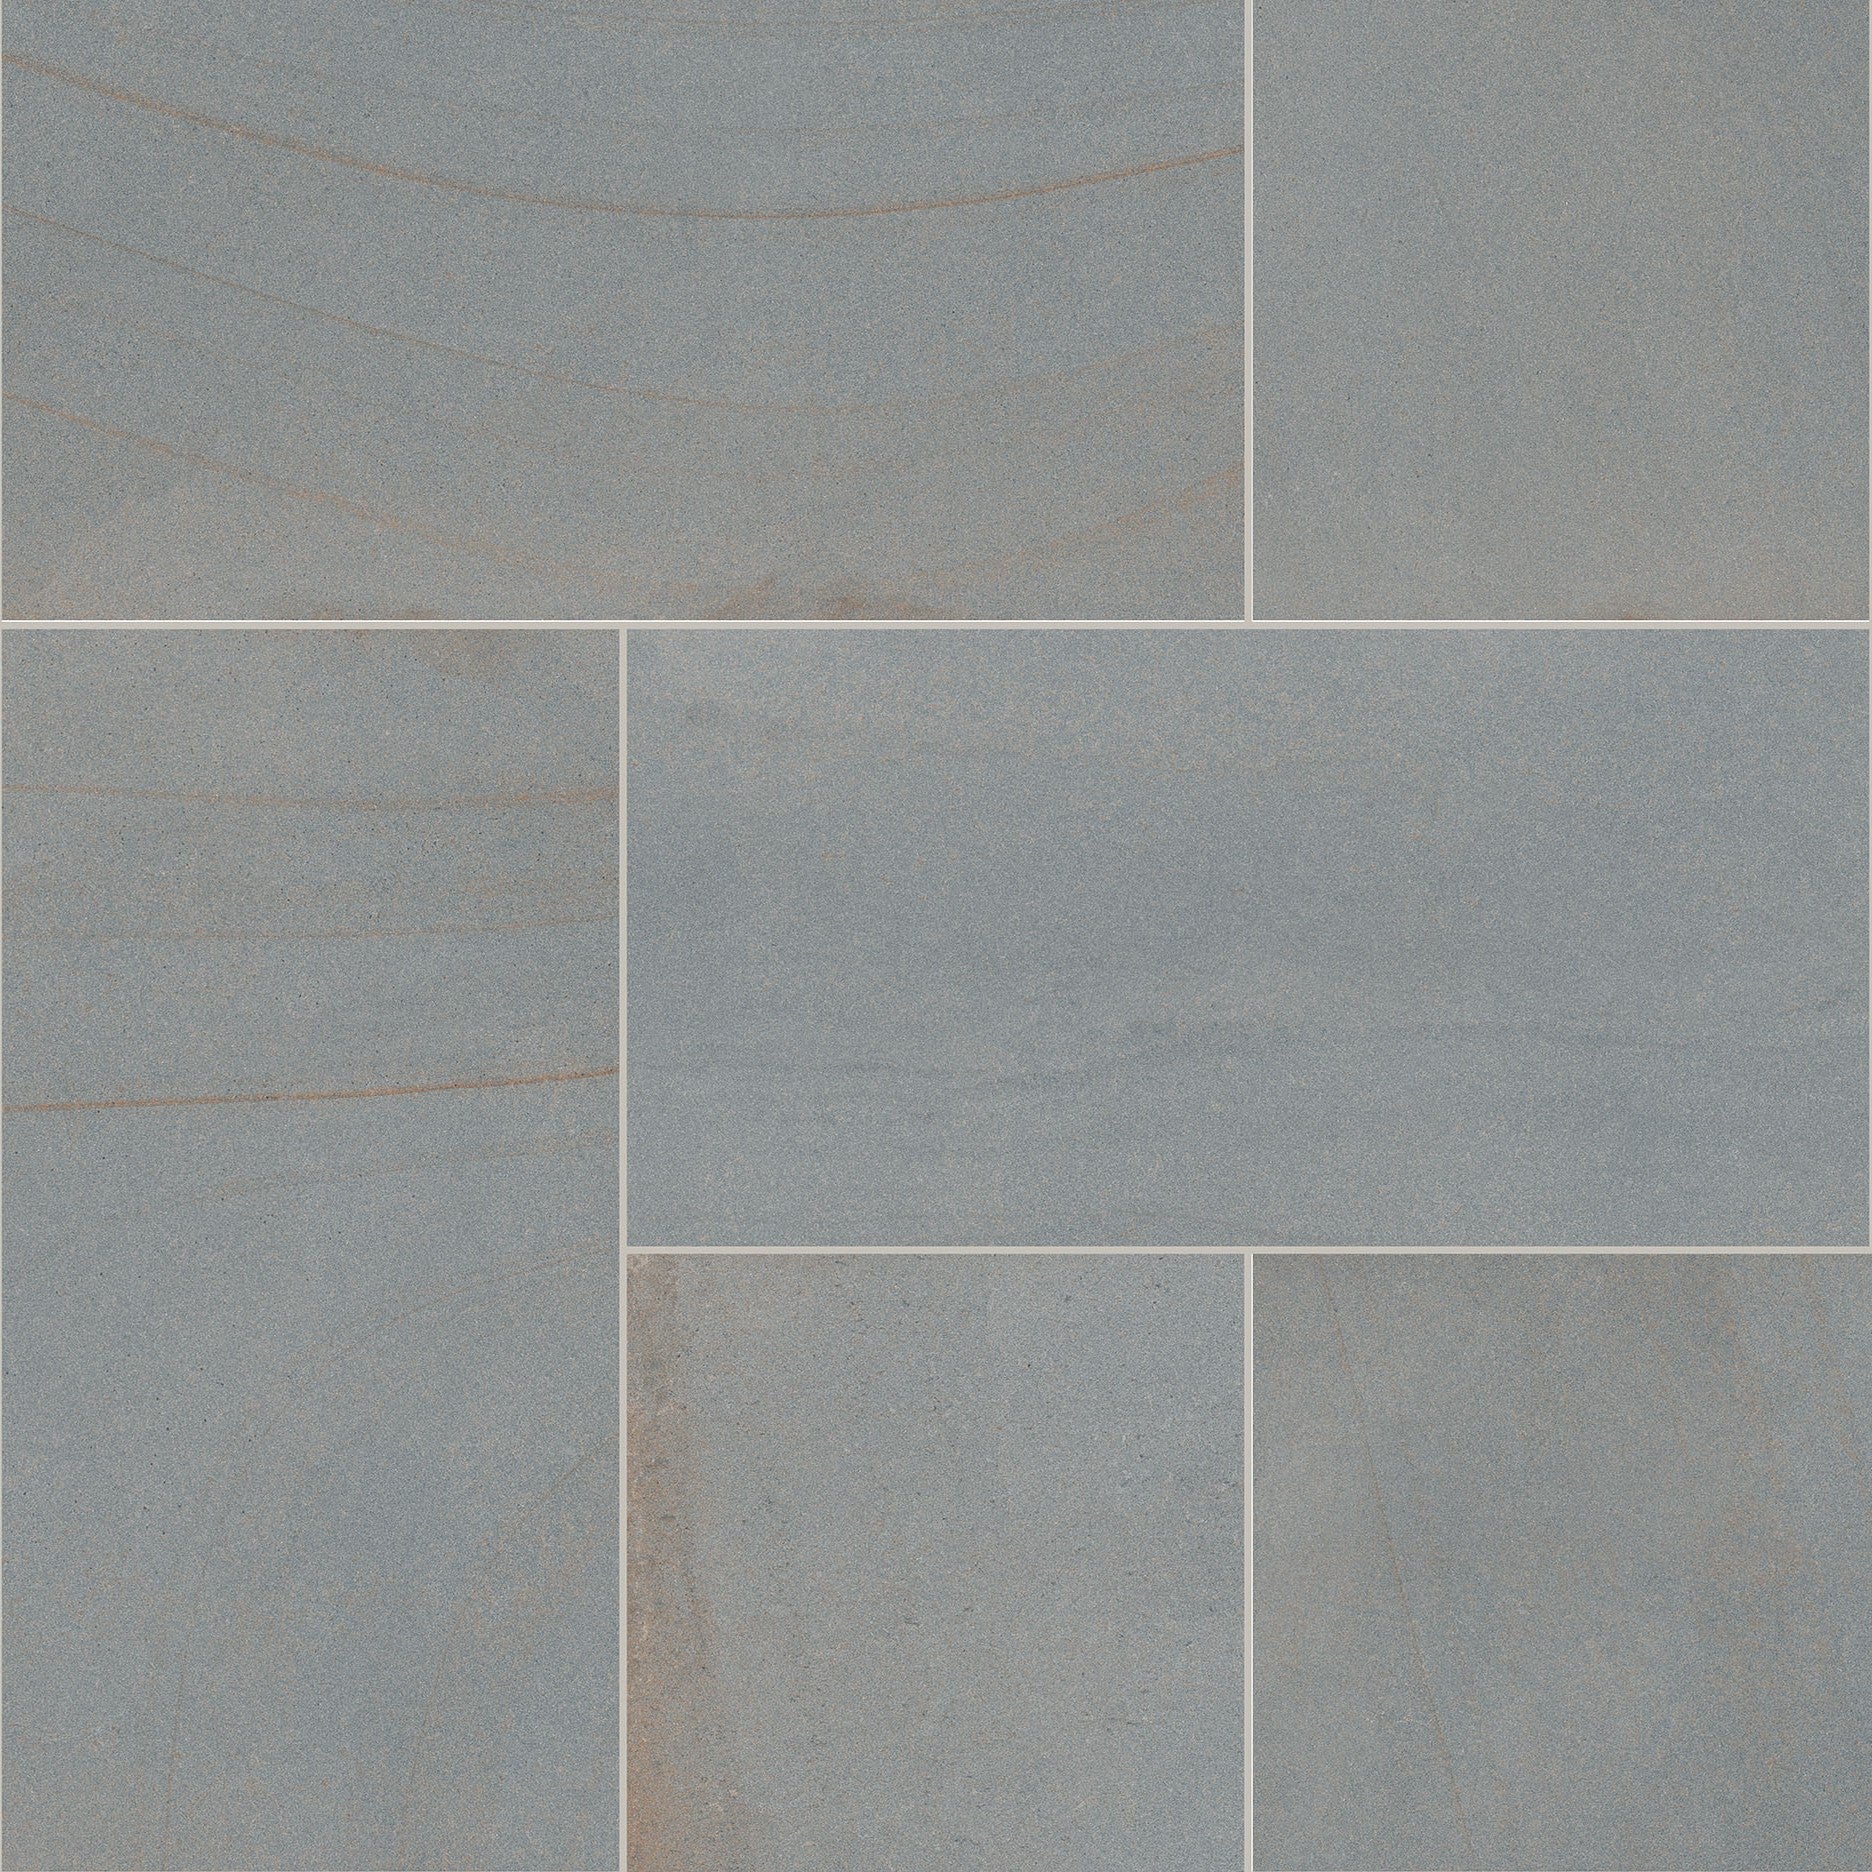 surface group international frontier 20 porcelain paving tile bluestone full color thermal 12x24 for outdoor application manufactured by landmark